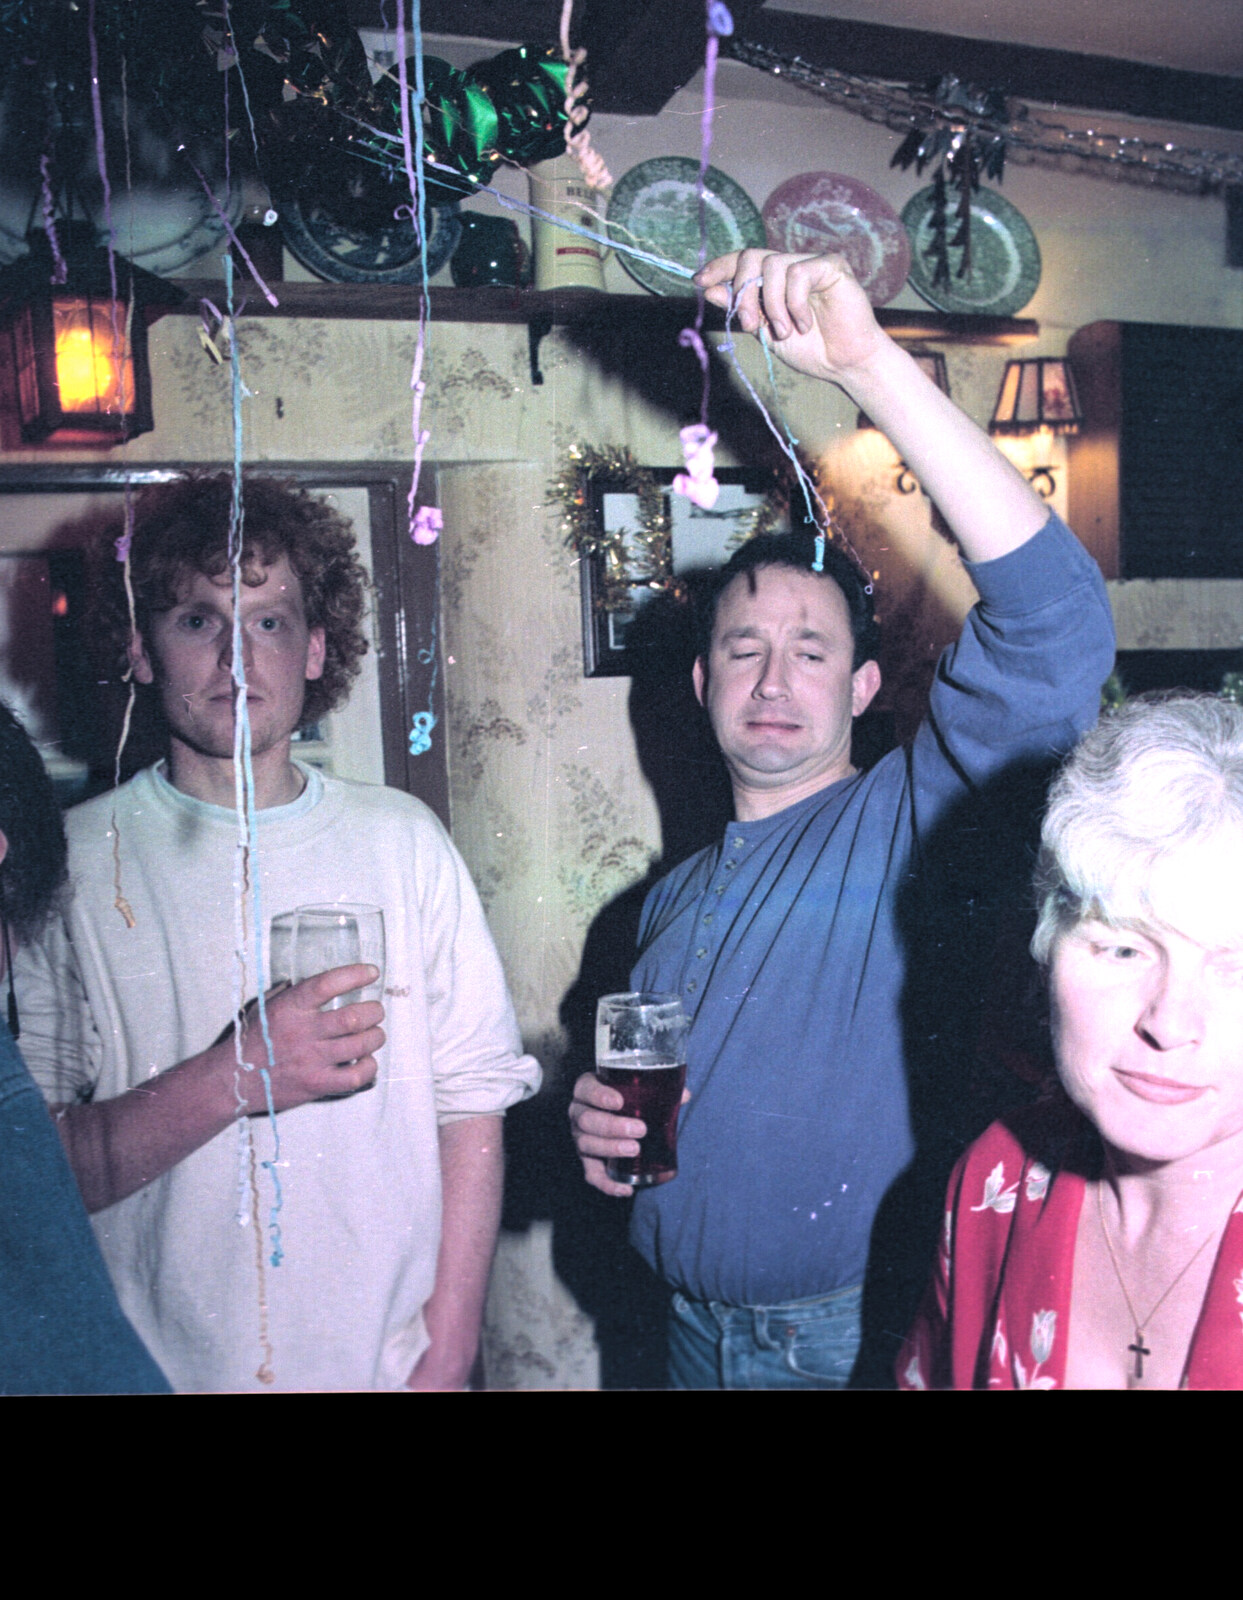 DH isn't sure about some streamers from New Year's Eve in the Swan Inn, Brome, Suffolk - 31st December 1995